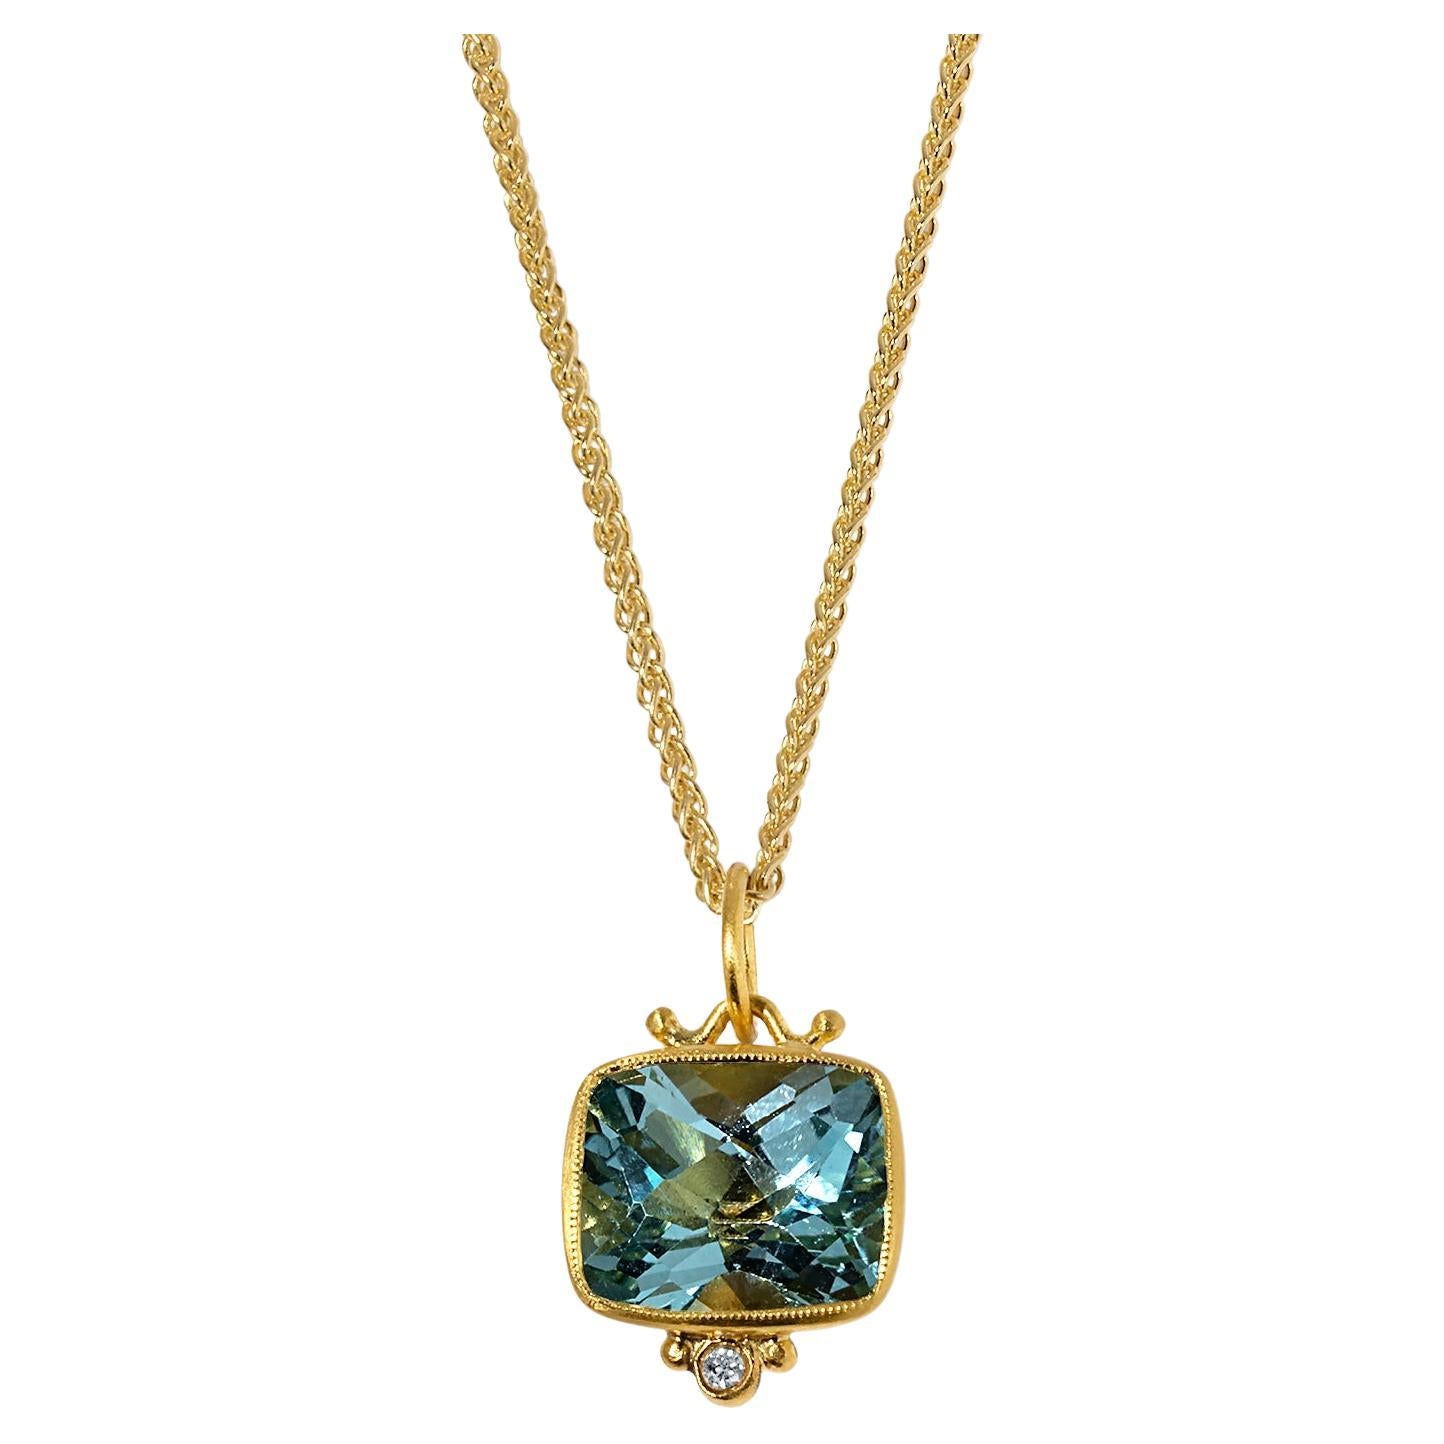 Faceted Checkerboard Bright Blue Topaz Pendant, 24K Solid Gold Necklace Pendant by Prehistoric Works of Istanbul, Turkey. These pendants look great alone or paired with other coin pendants or with miniature pendants. Measures 13mm x 16mm, Pendant